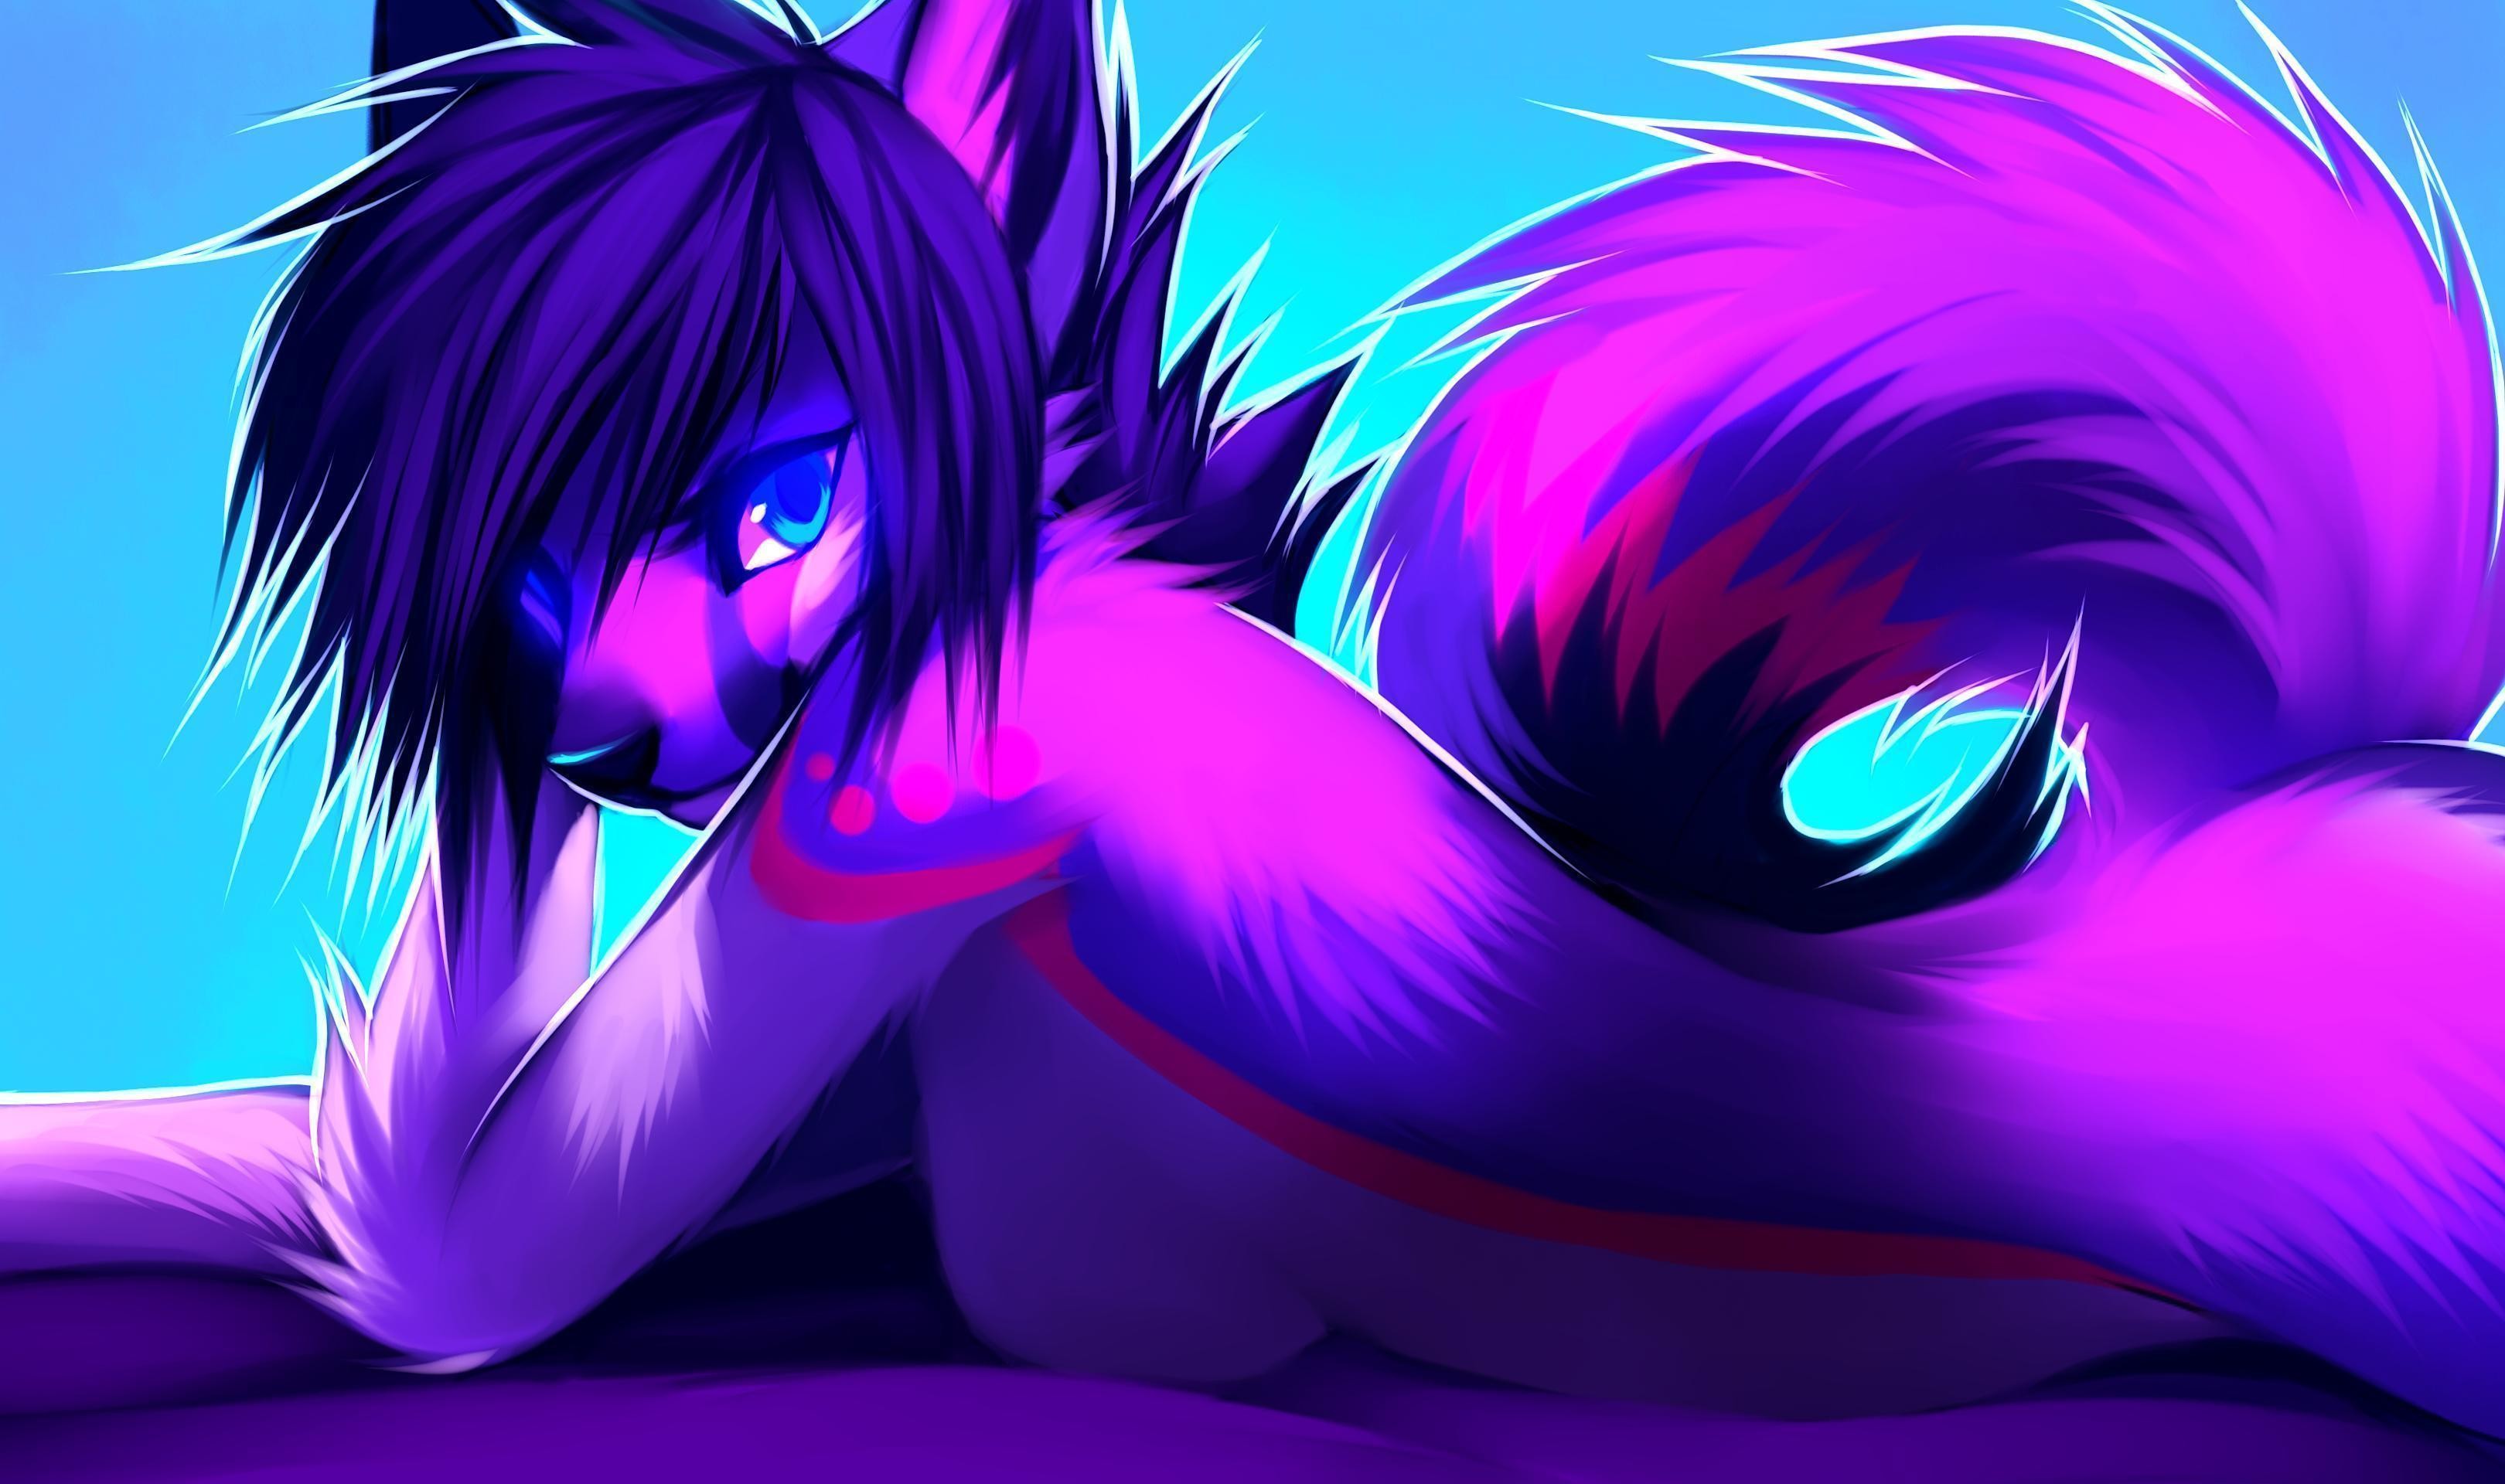 3240x1920 ... Furry Wallpapers Wallpaper and Furry art